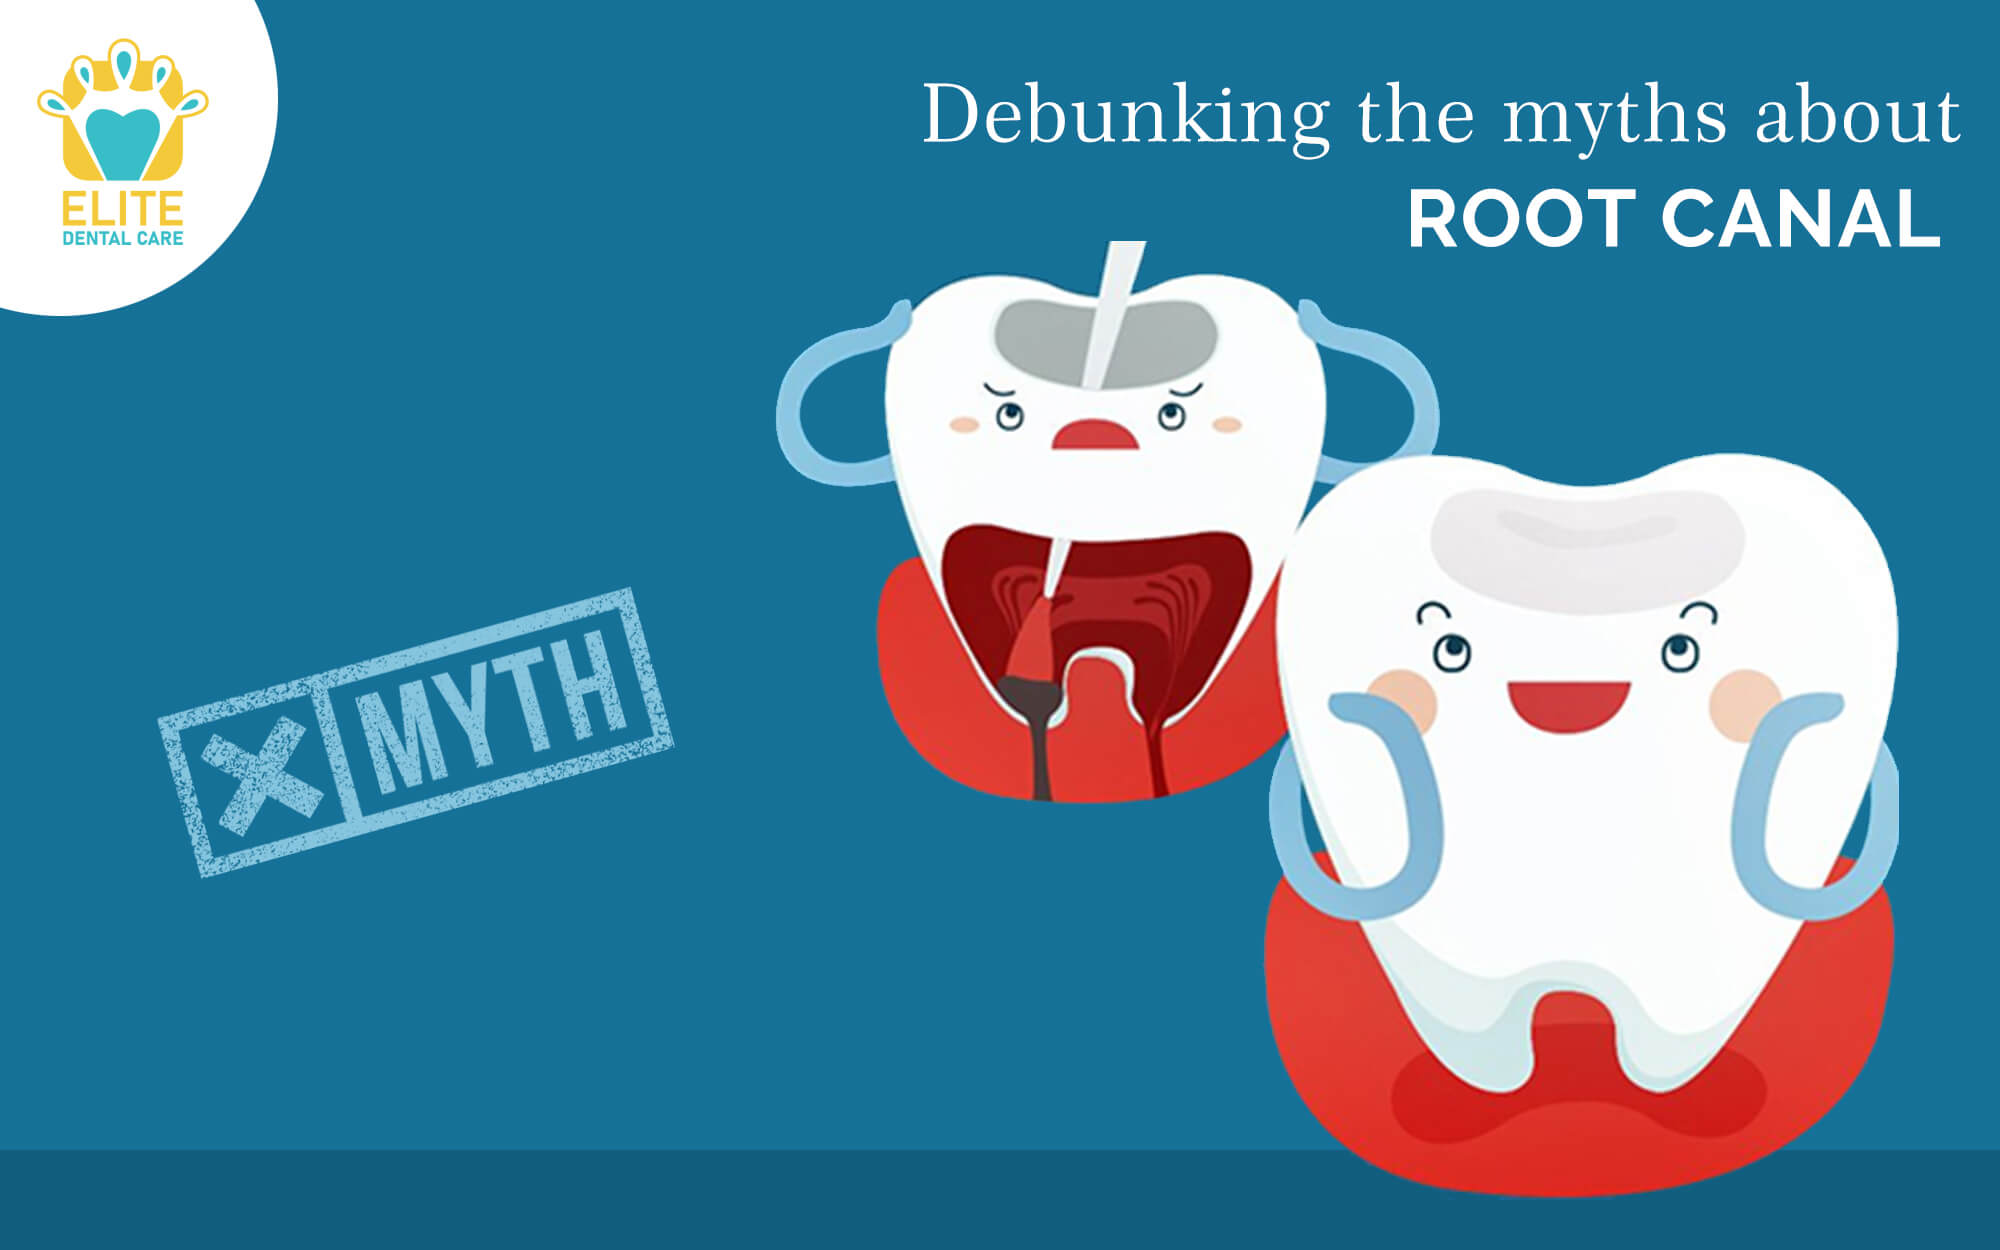 DEBUNKING THE COMMON MYTHS ABOUT ROOT CANAL TREATMENT